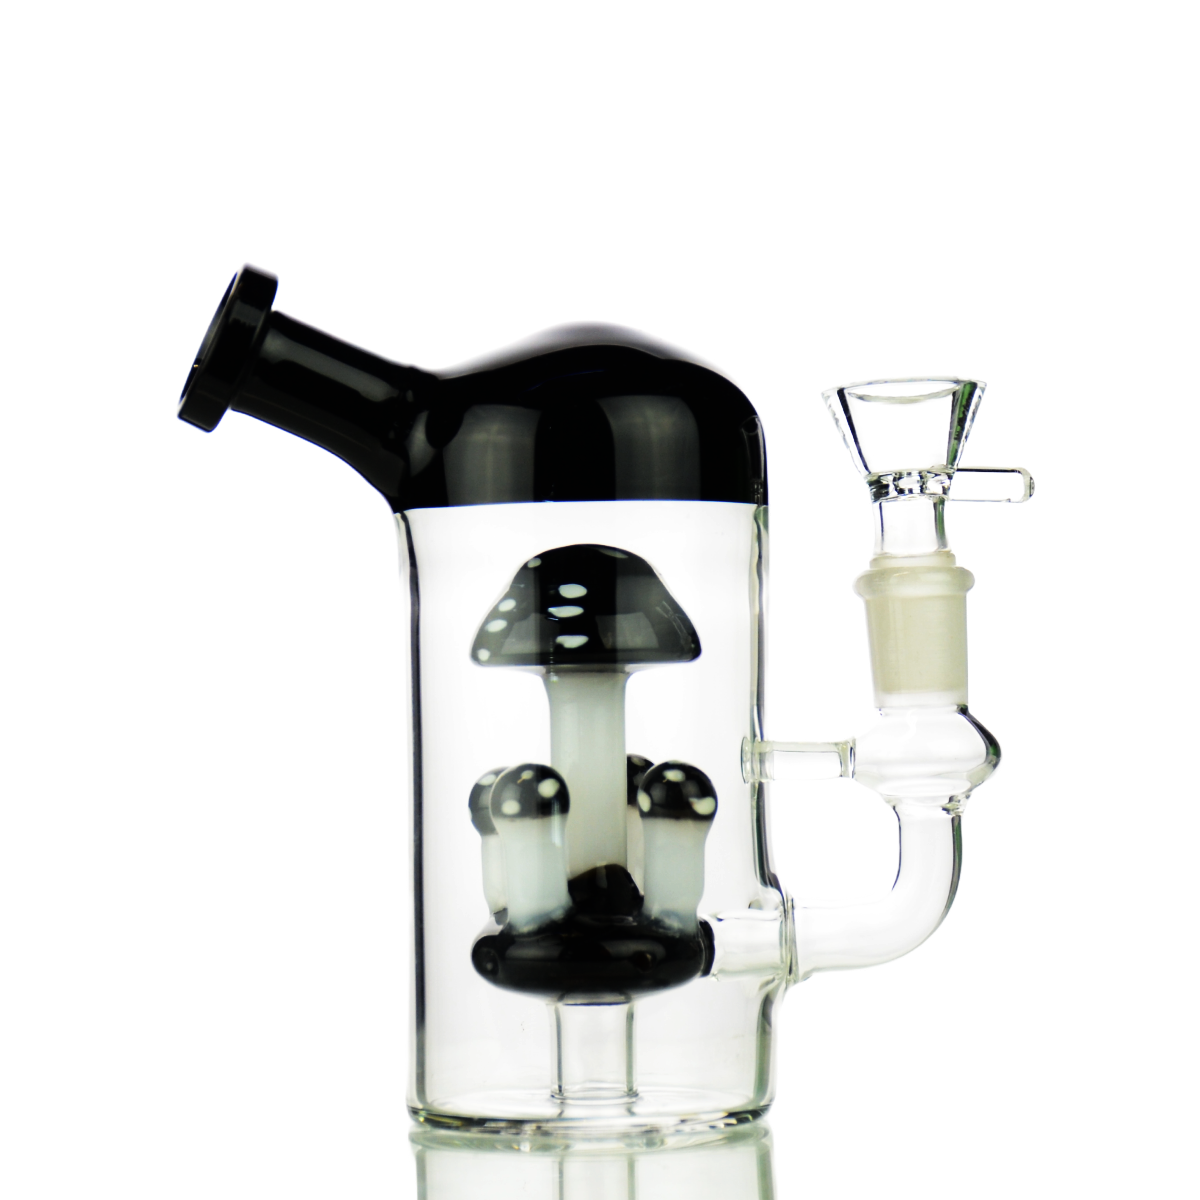 5" Mushroom Water Pipe with 14mm Male Bowl